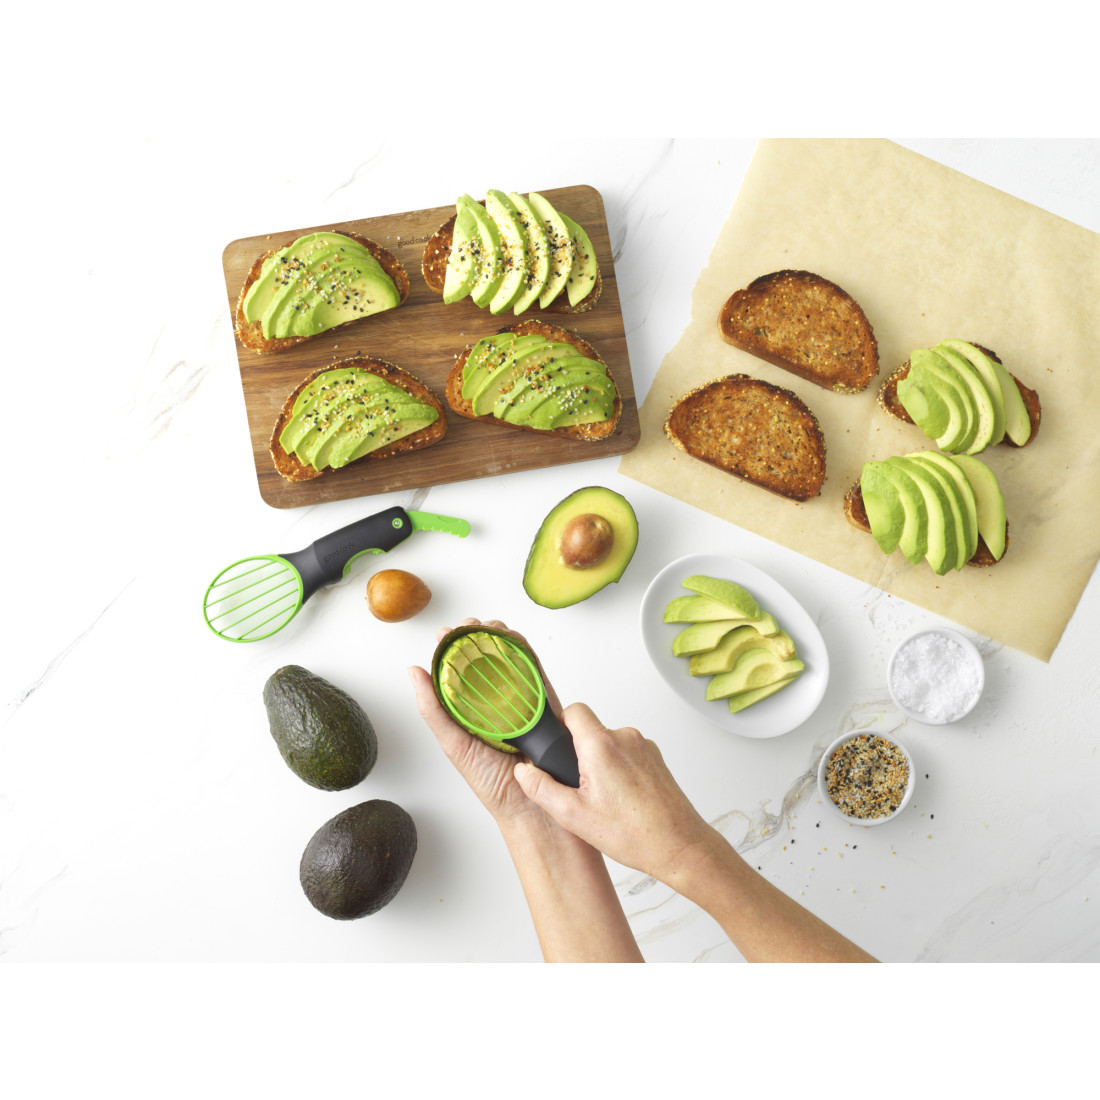 3 in 1 Avocado Slicing Tool – Avocado Cutter with Grip Handle for Fruit and  Vegetables Avocado Slicer Splitter Pitter and Cutter with Comfort Handle